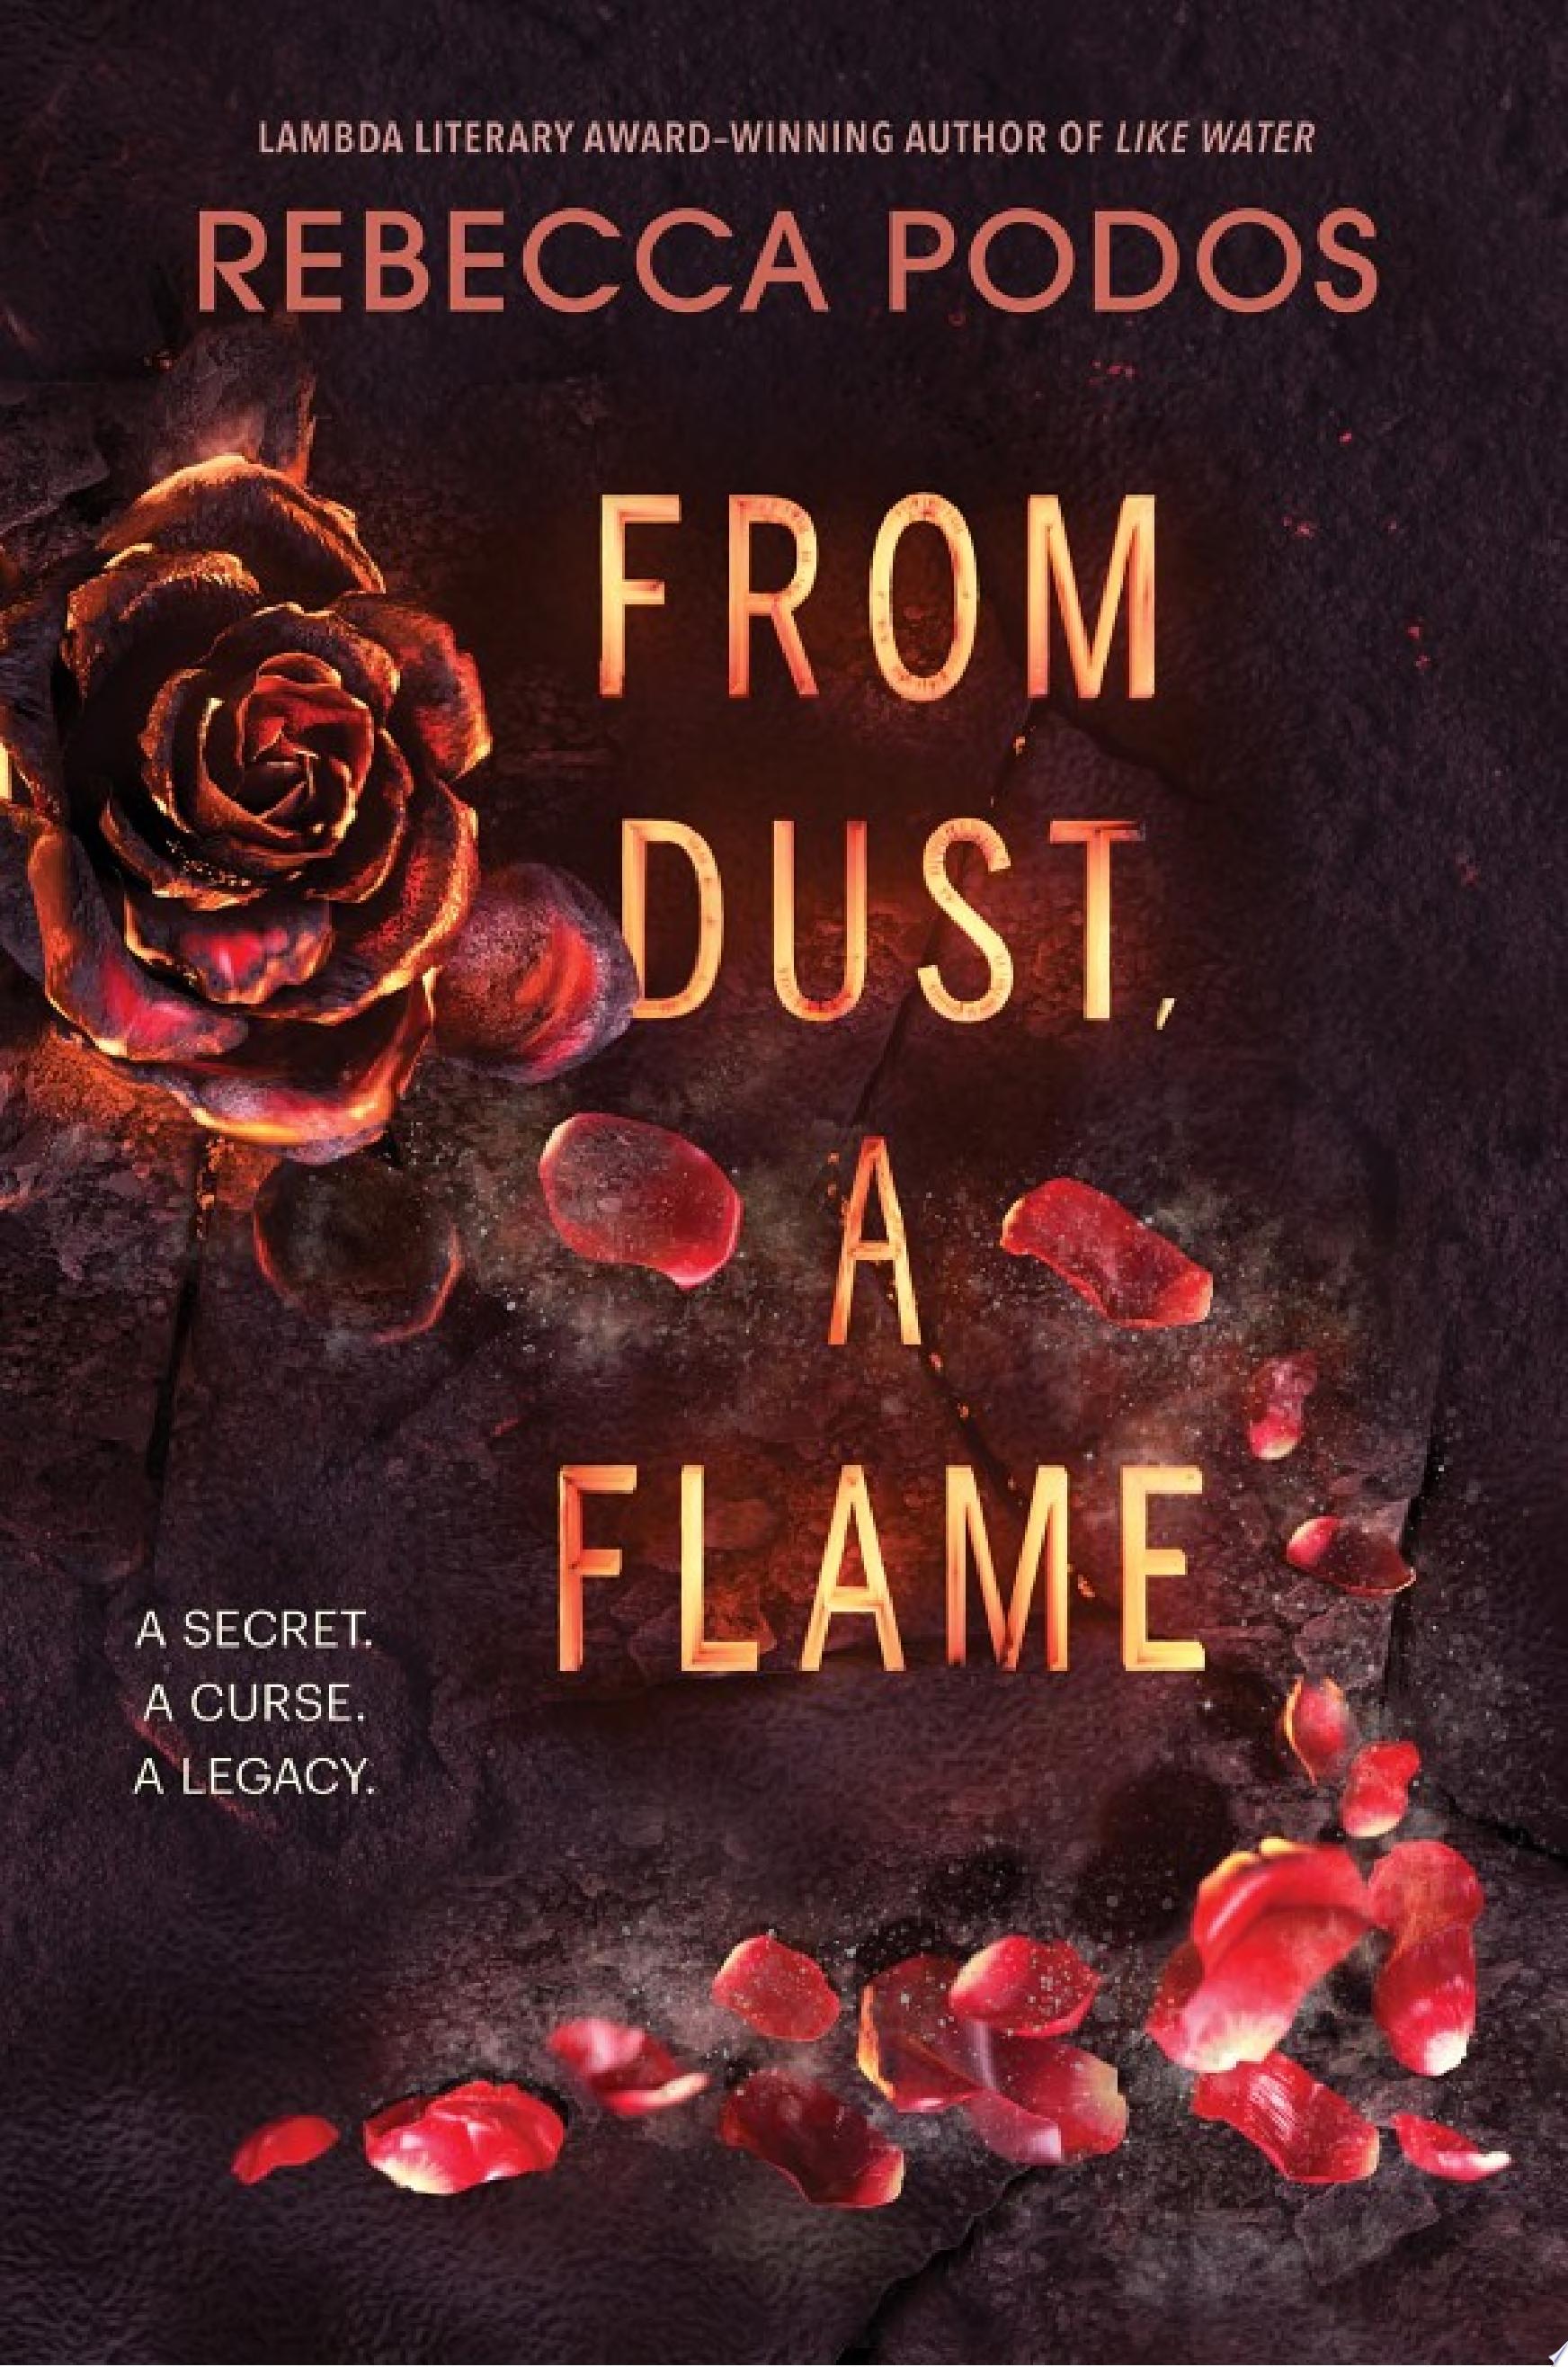 Image for "From Dust, a Flame"